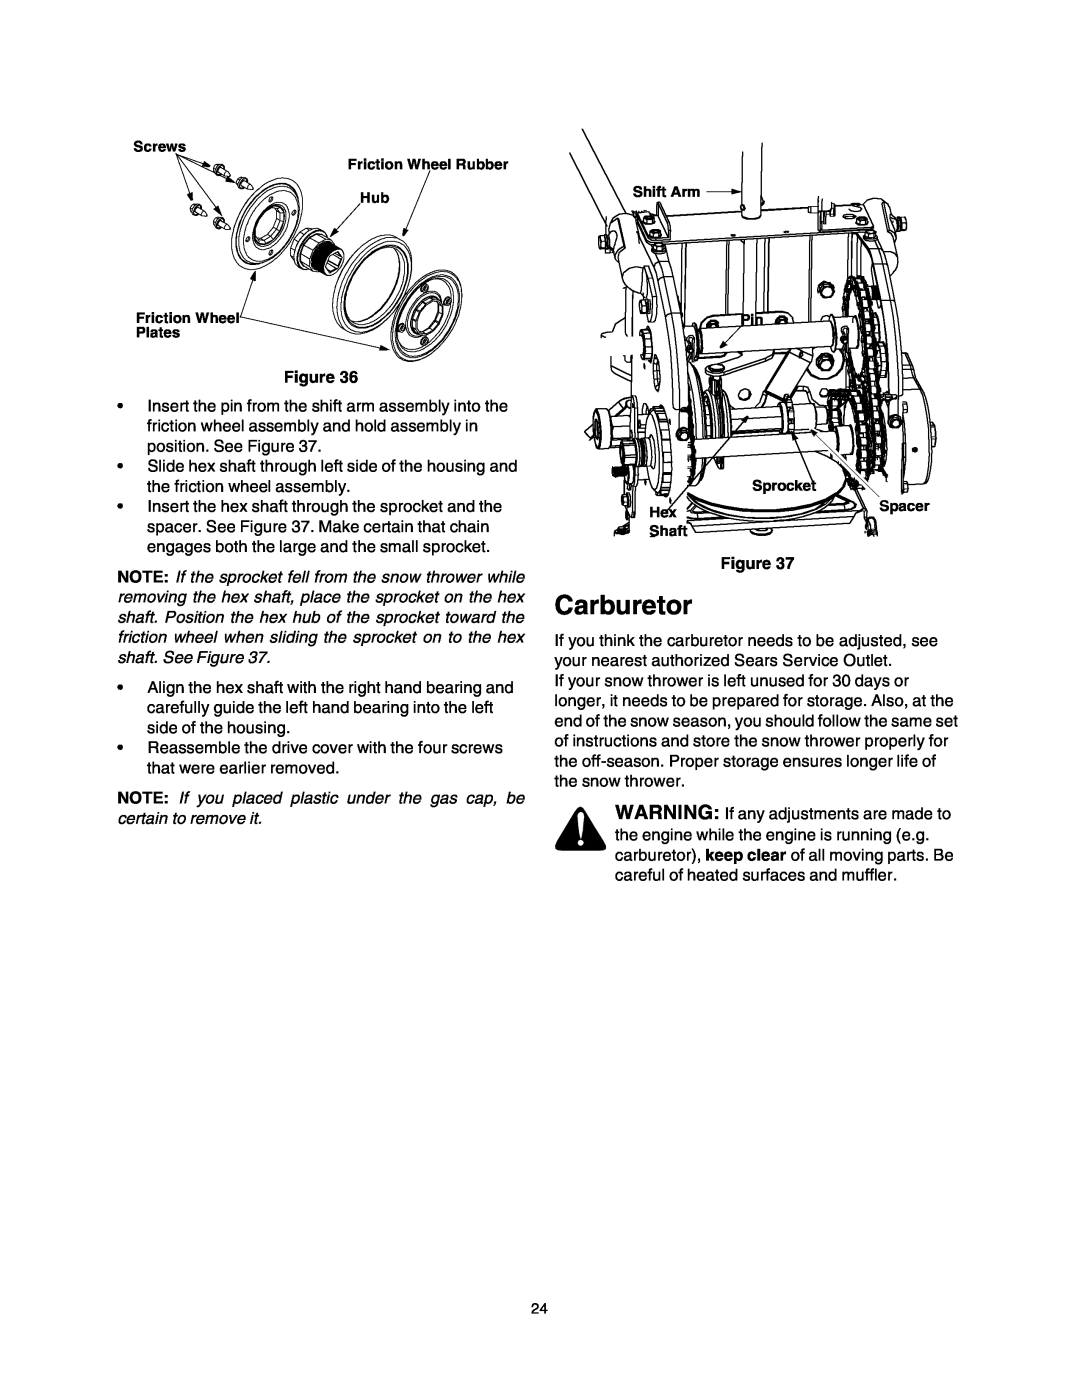 Sears 247.88853 owner manual Carburetor, NOTE If you placed plastic under the gas cap, be certain to remove it 